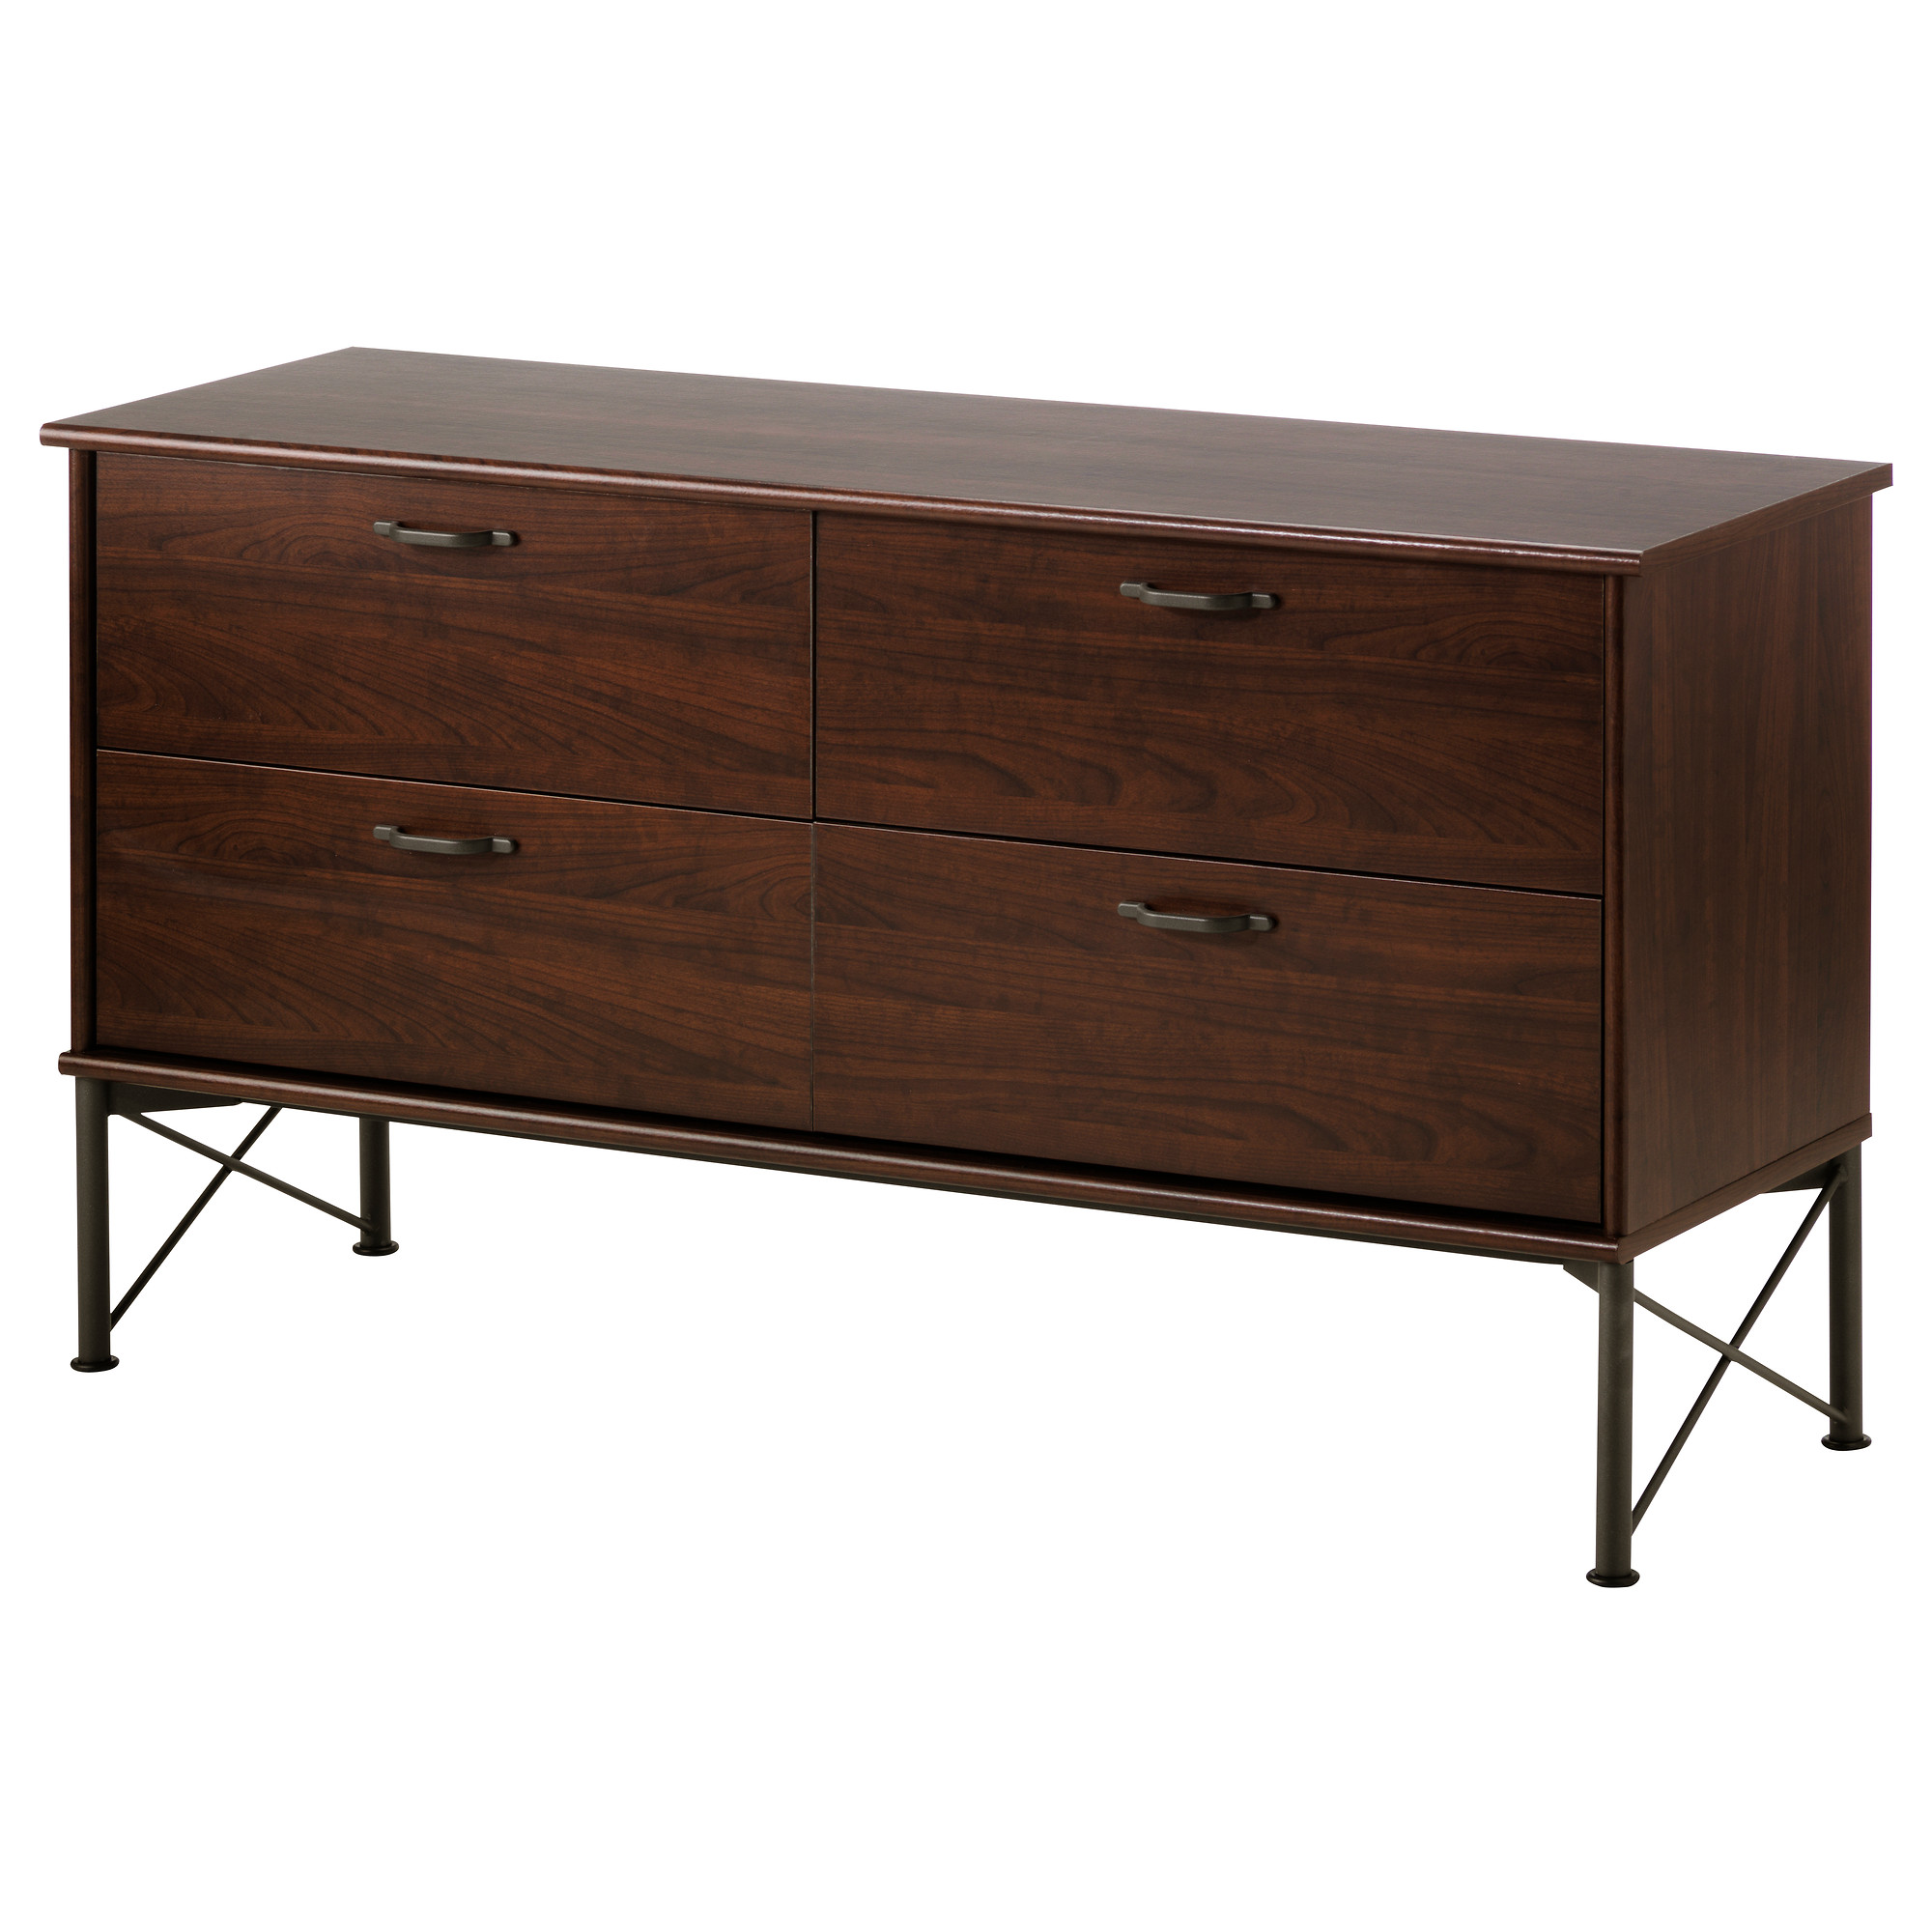 MUSKEN chest of 4 drawers